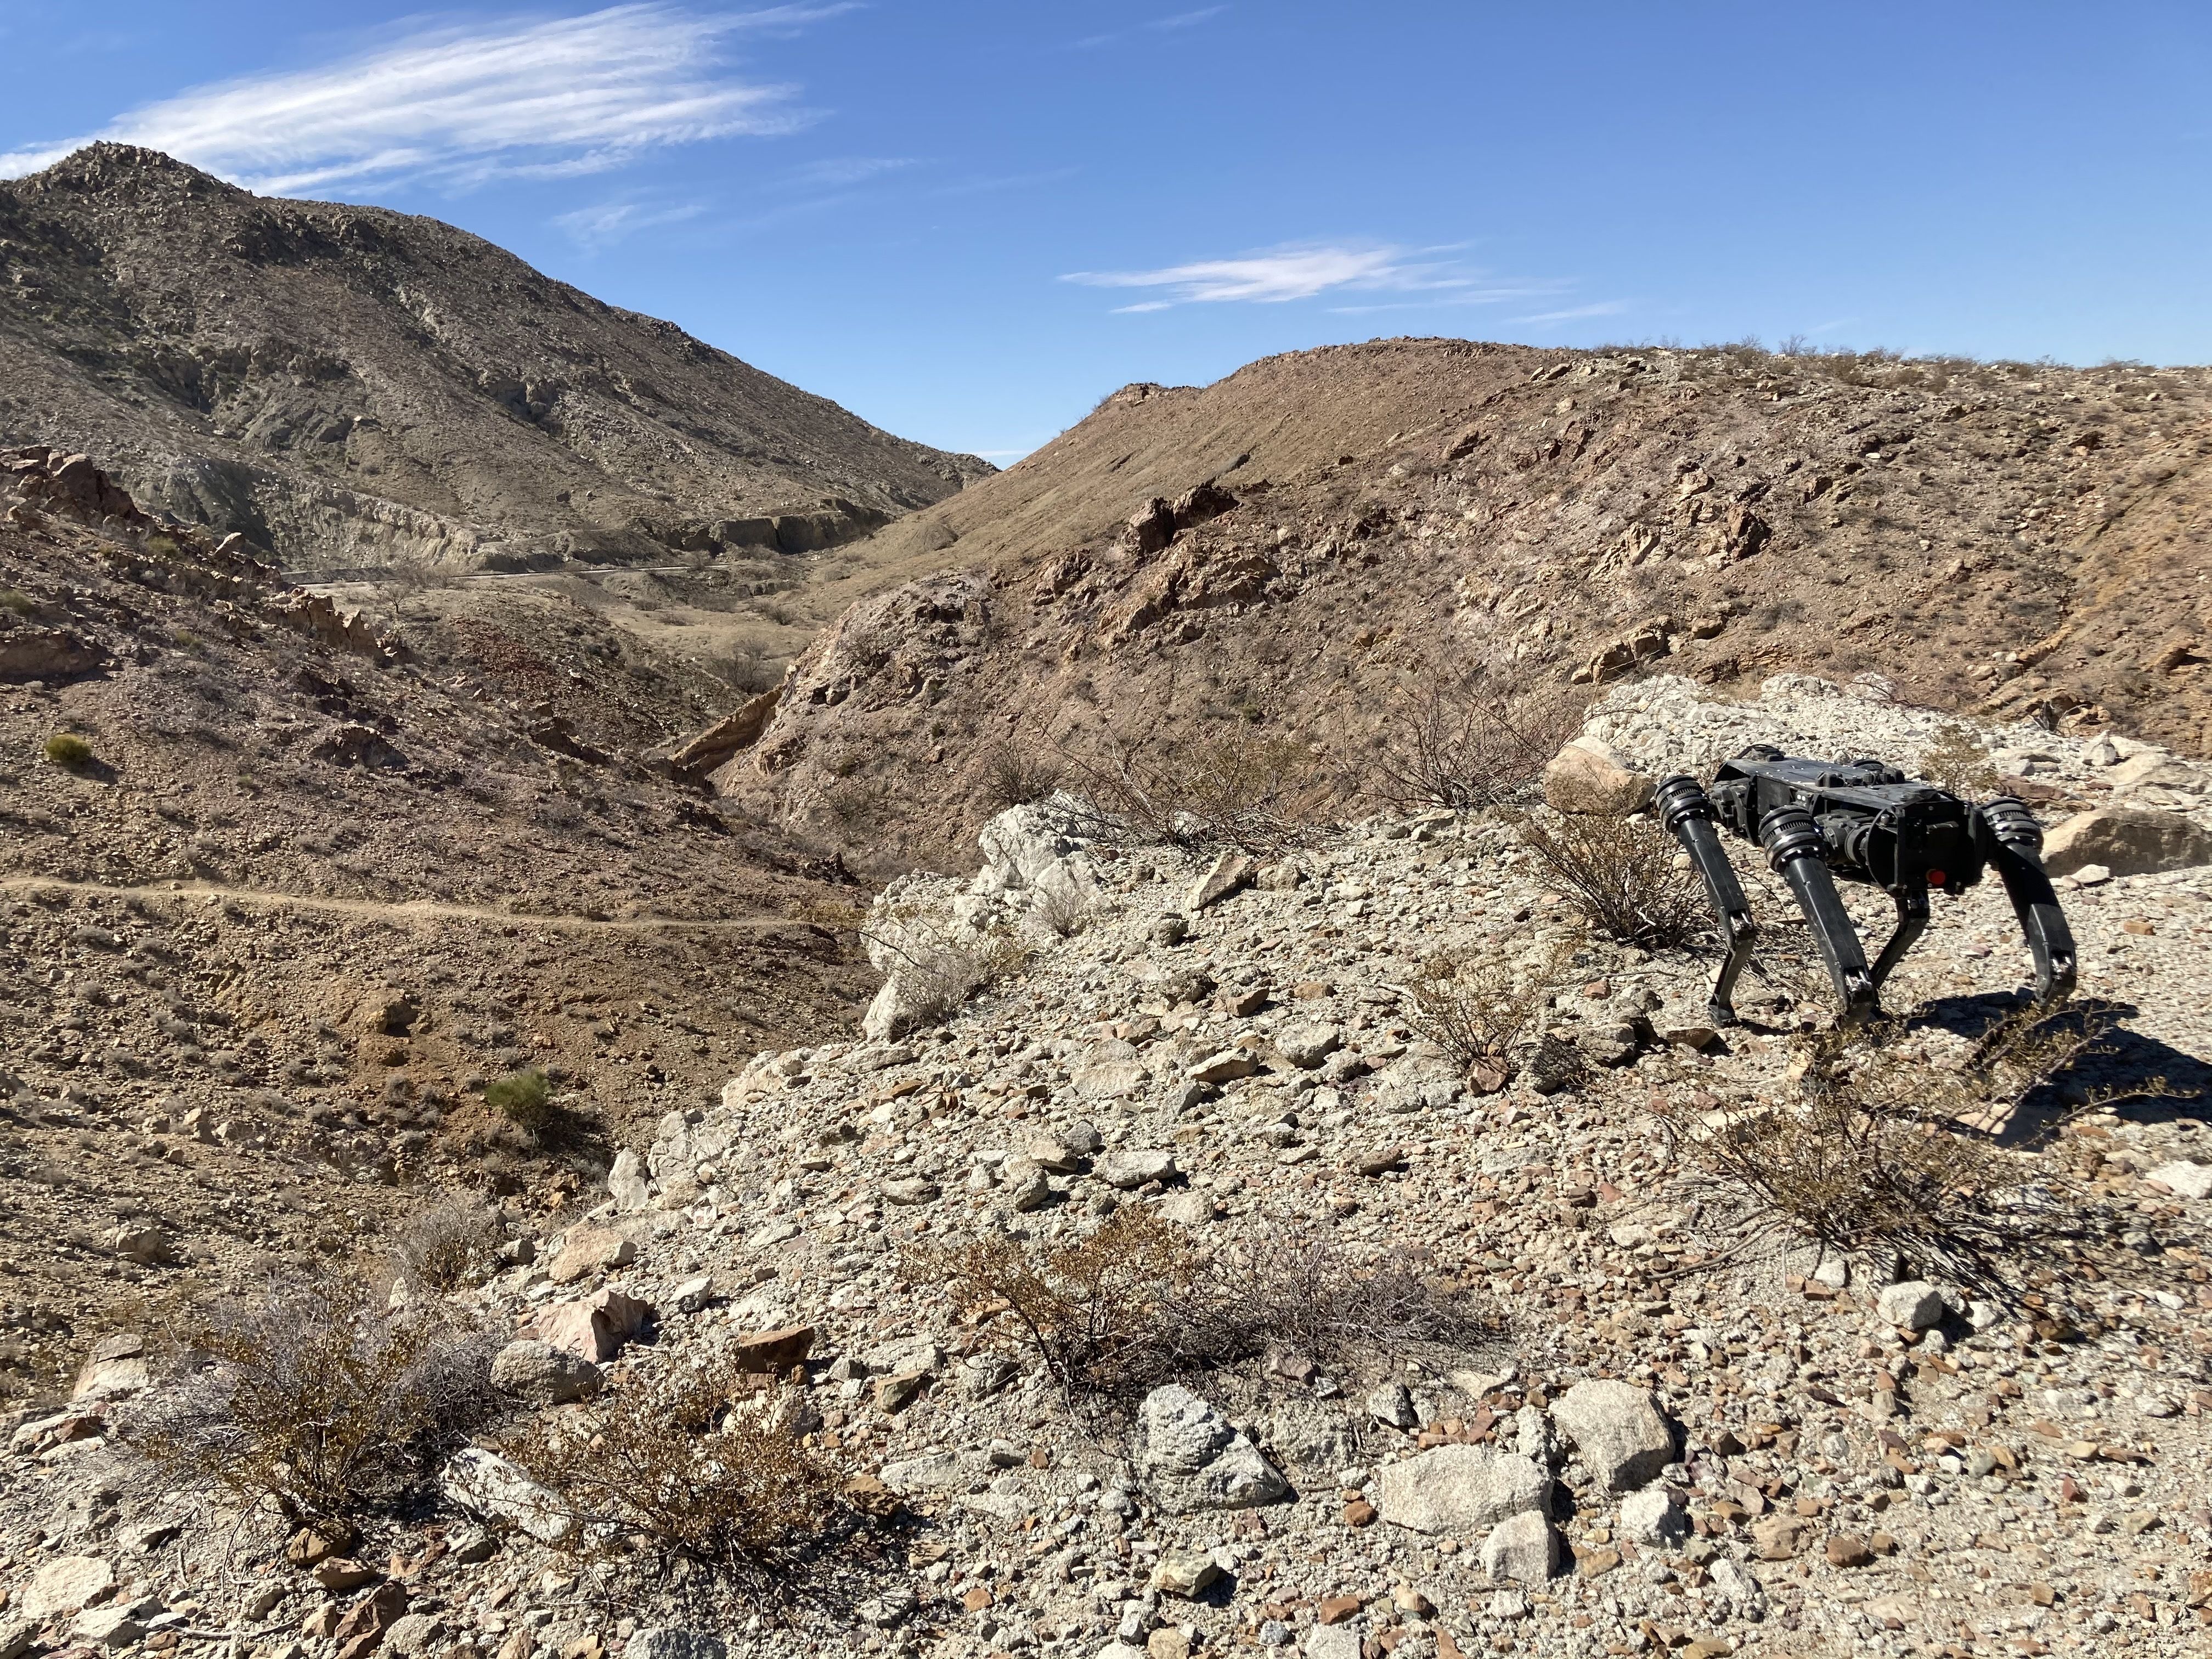 A robot dog overlooks a desert terrain along the U.S.-Mexico border with mountains in the background.